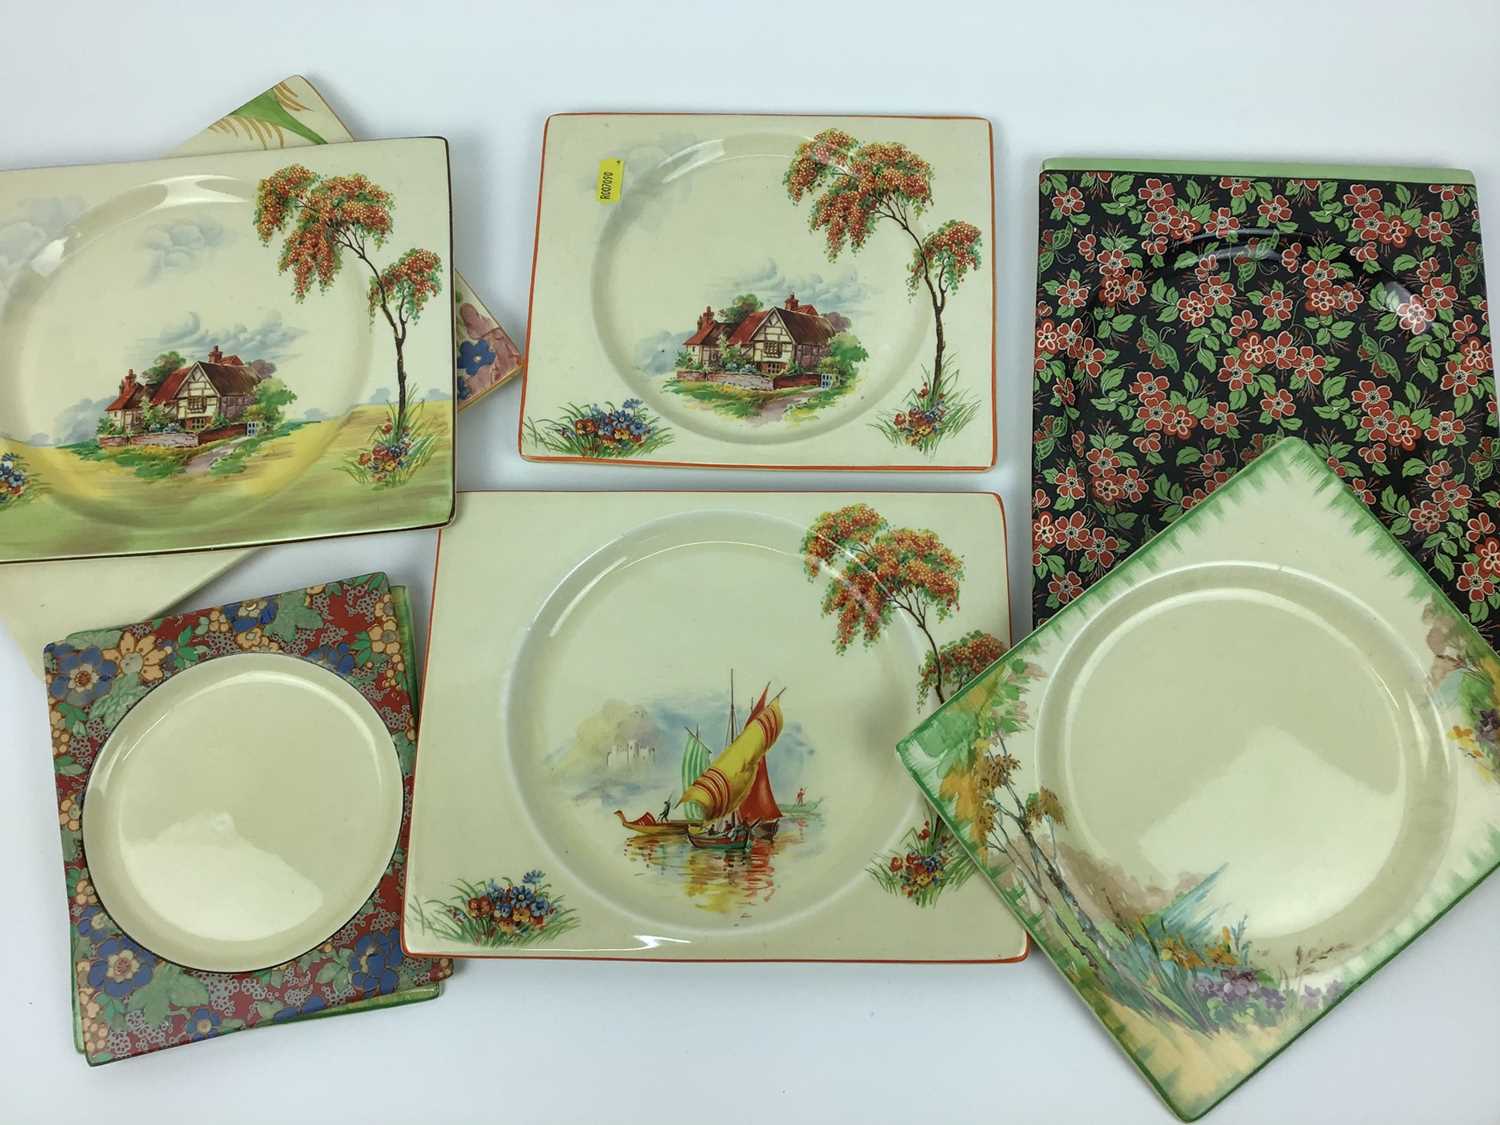 Lot 27 - Collection of Clarice Cliff Royal Staffordshire The Biarritz rectangular plates, decorated in various patterns